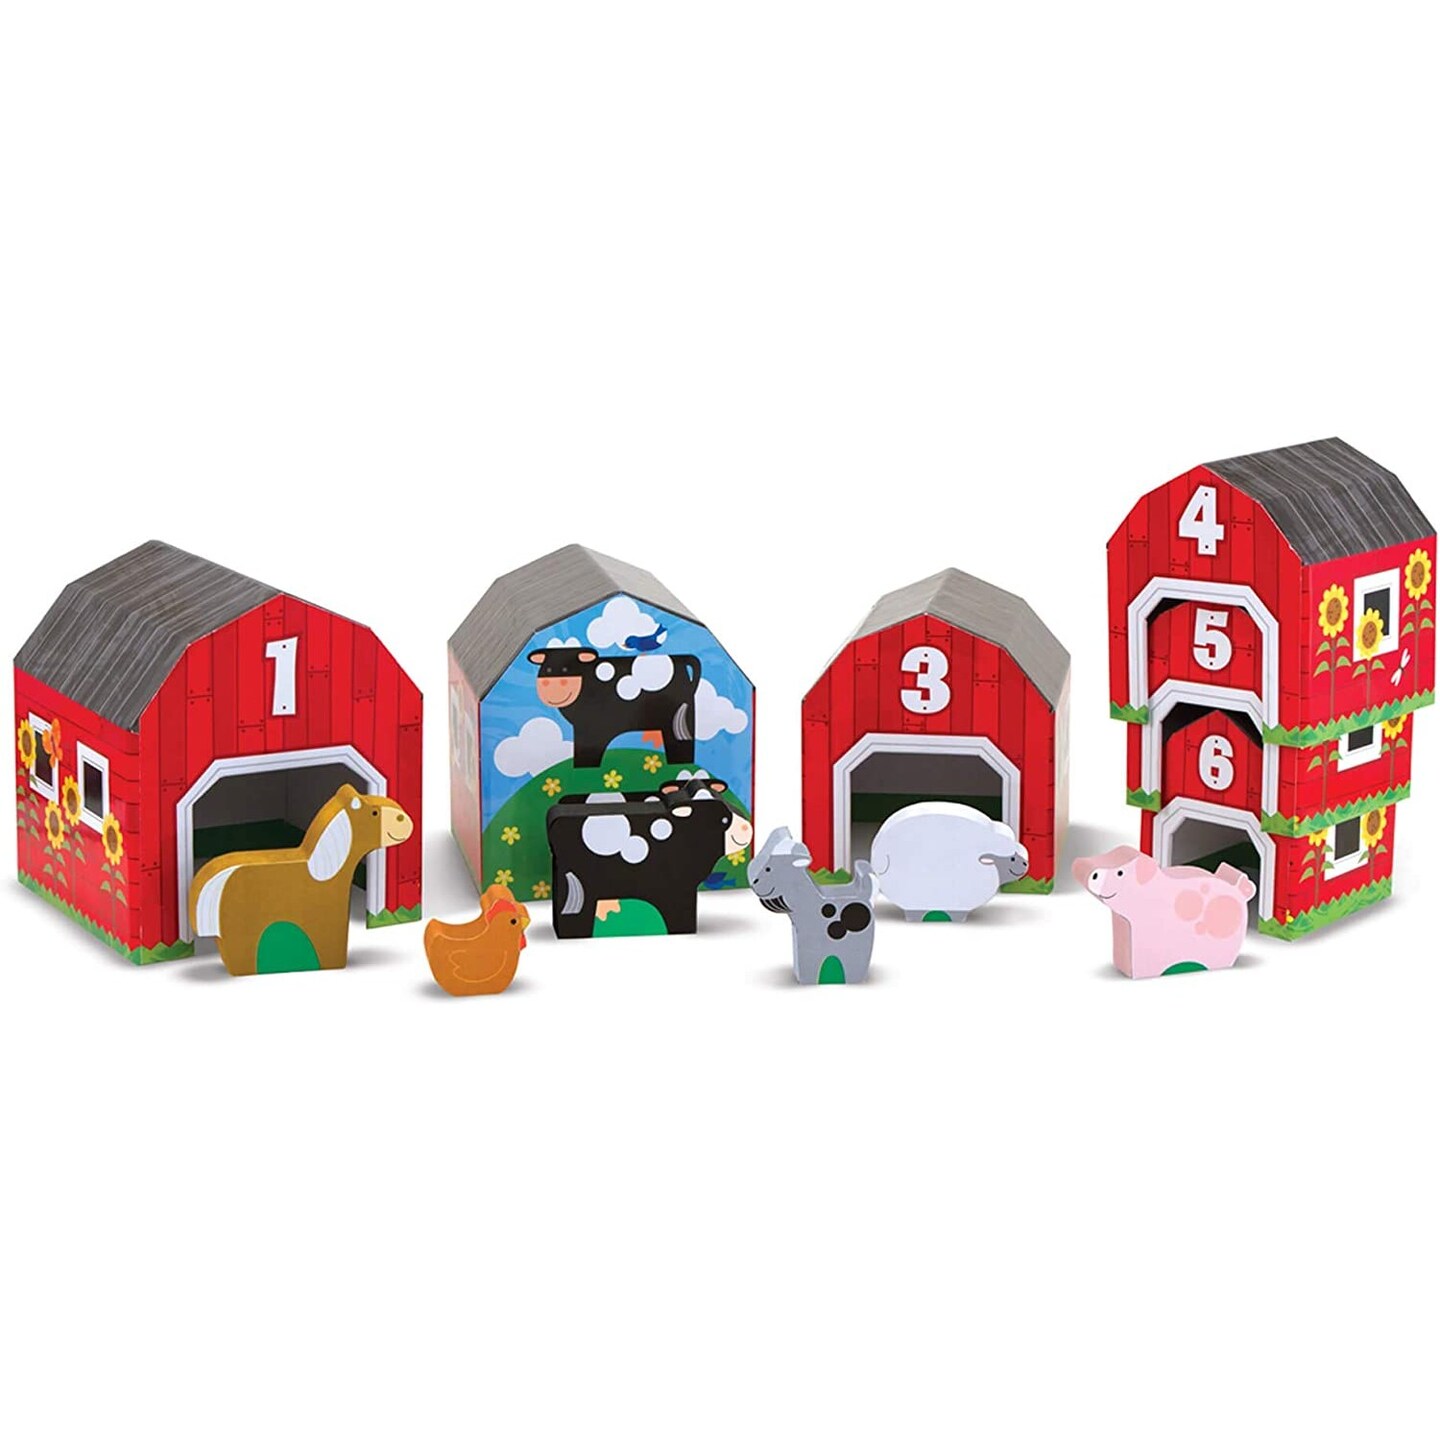 Melissa &#x26; Doug Nesting and Sorting Barns and Animals With 6 Numbered Barns and Matching Wooden Animals